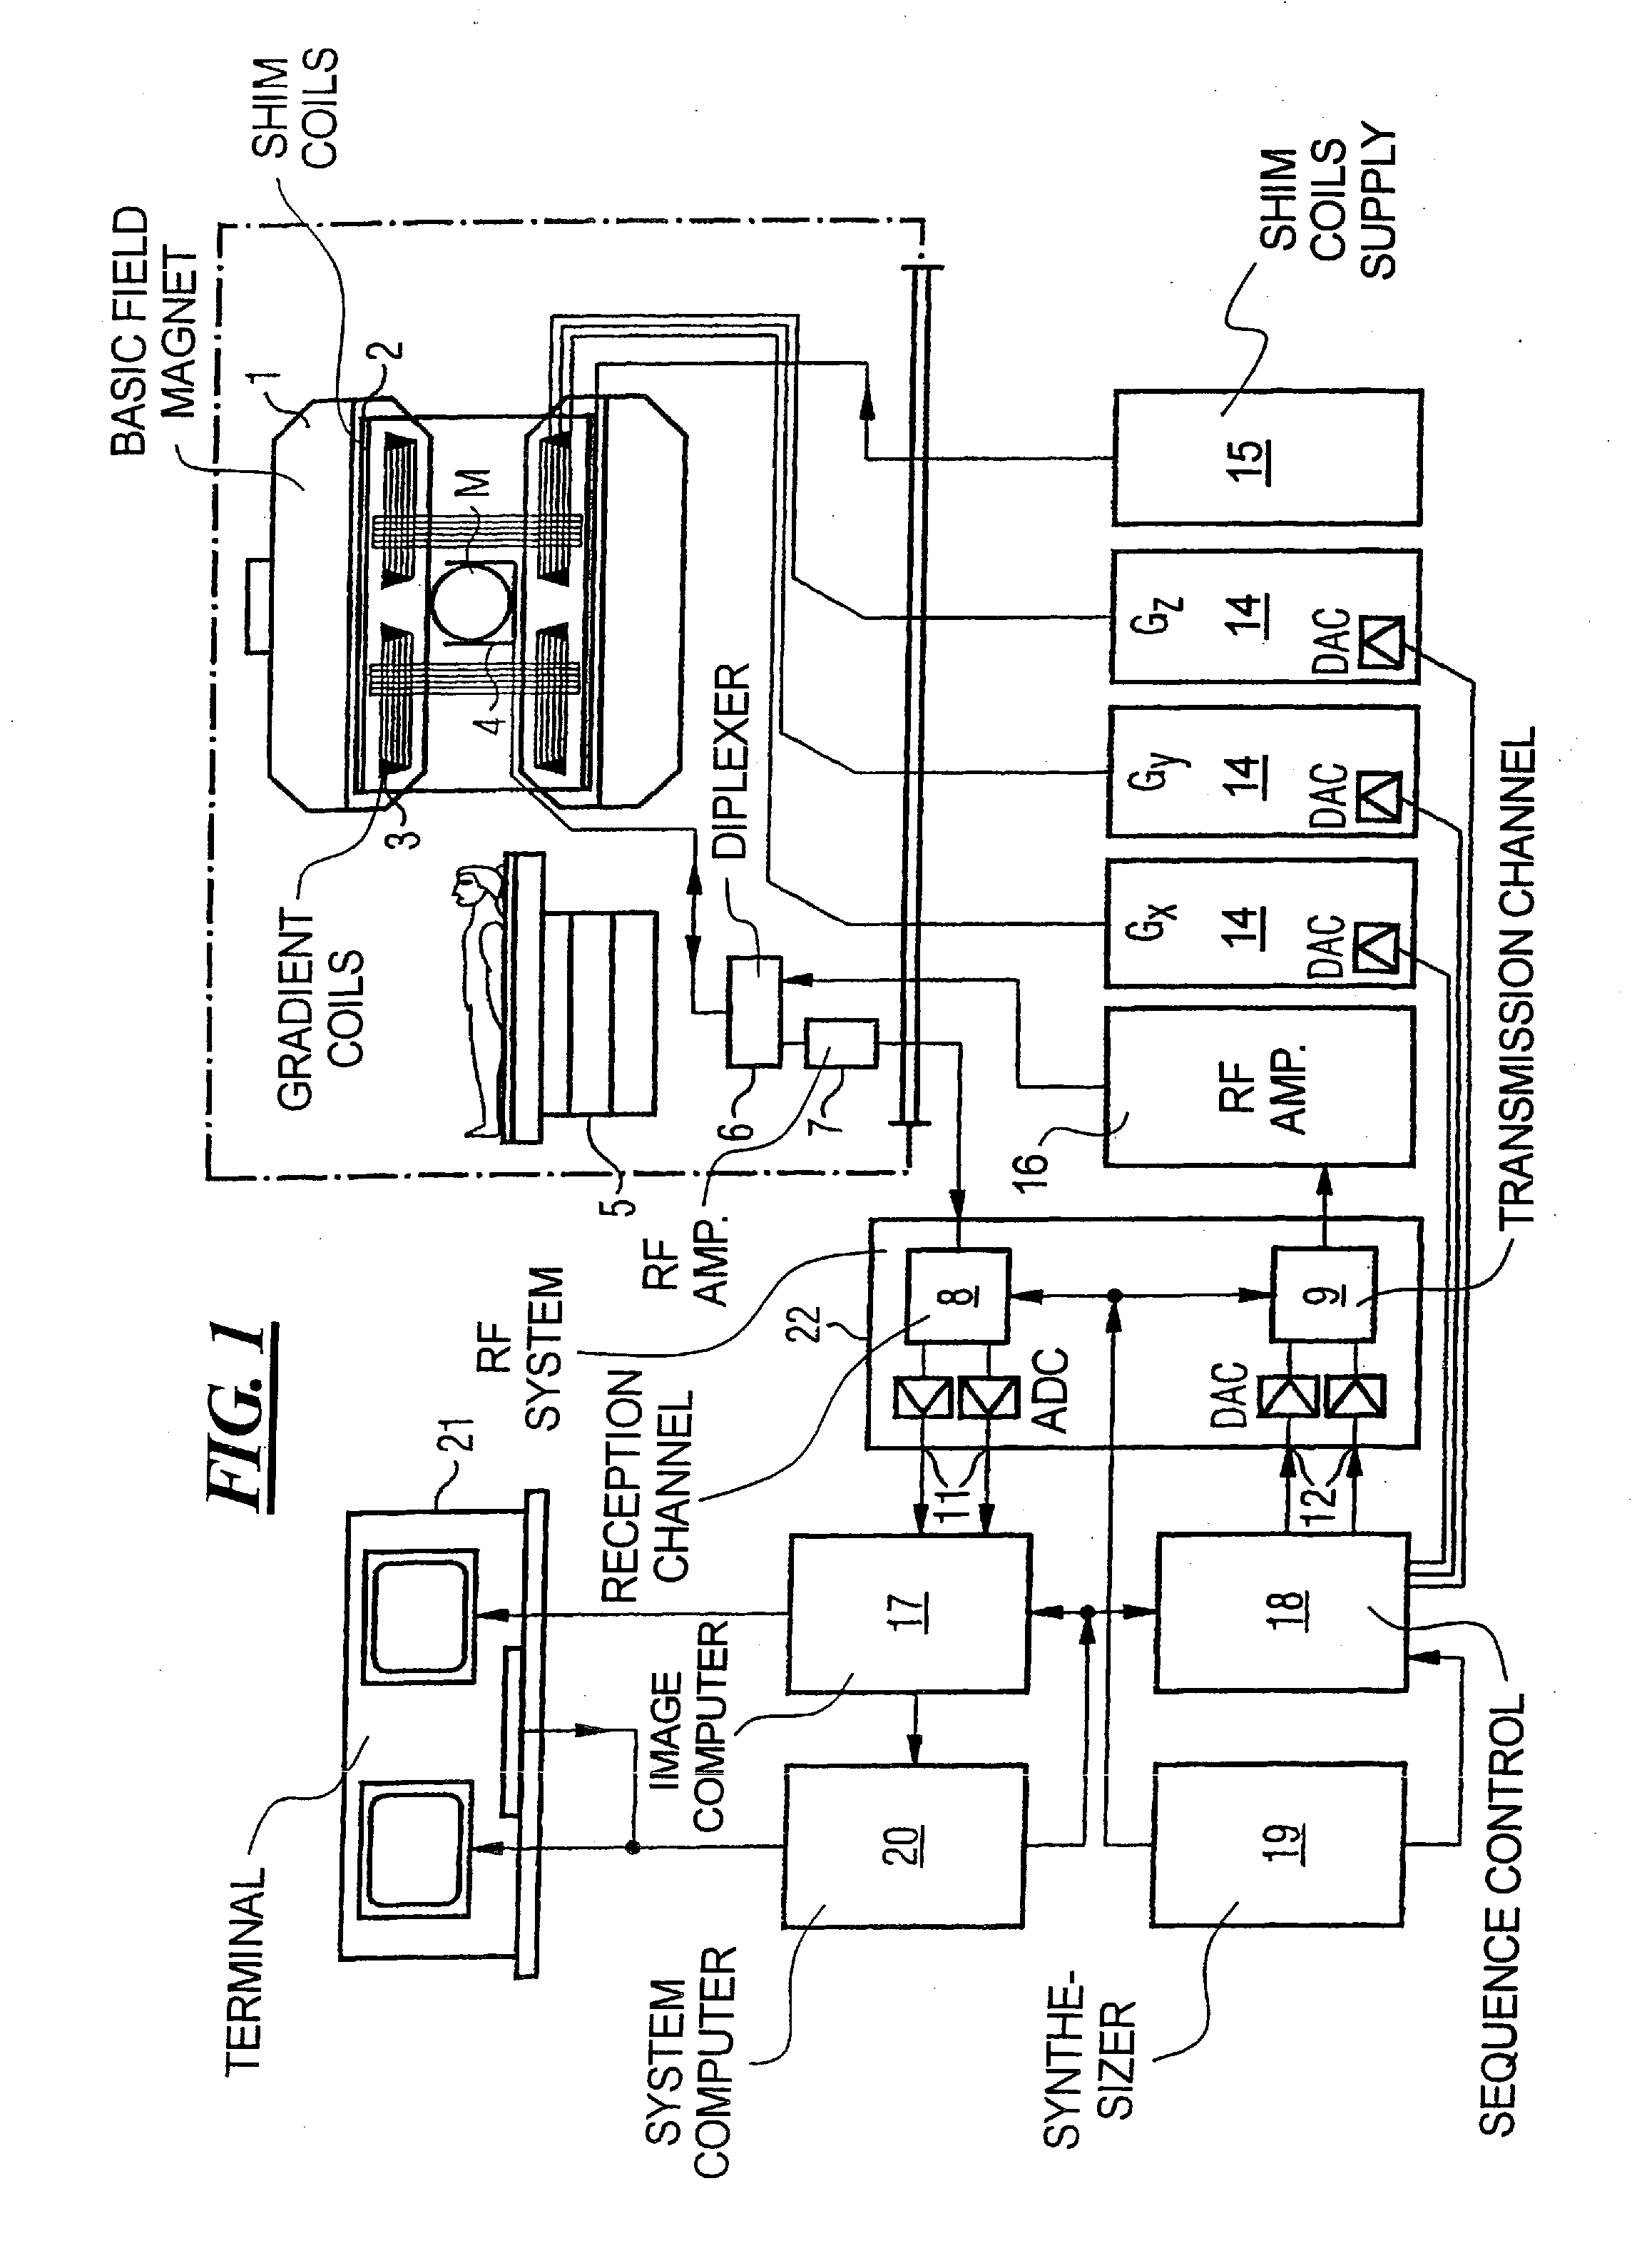 Magnetic resonance lmethod and apparatus with gated shimming of the basic magnetic field